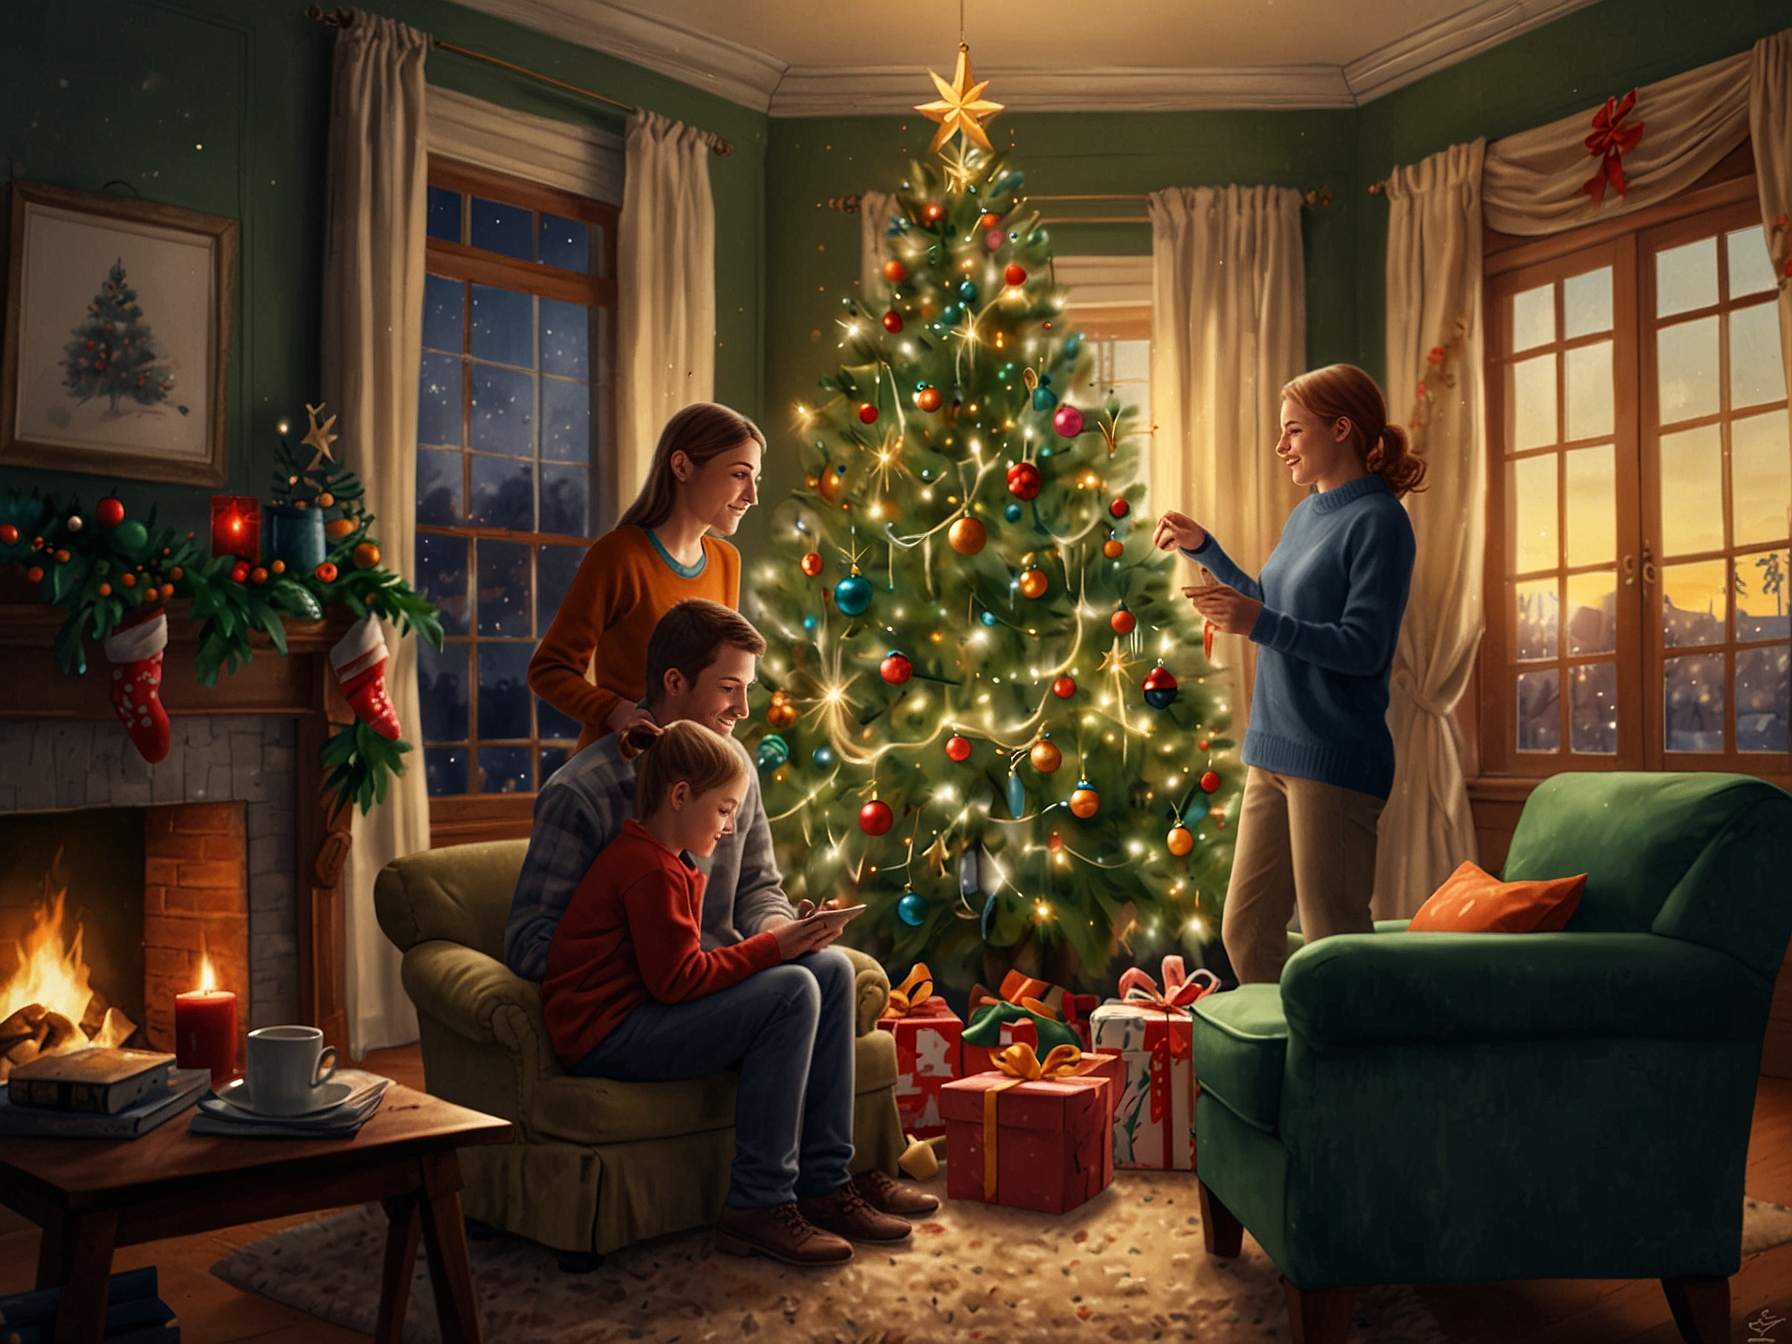 A festive scene where the family, depicted by Angela Stern and Christine Nyhart, gathers around a beautifully decorated Christmas tree, sharing a warm moment of togetherness.